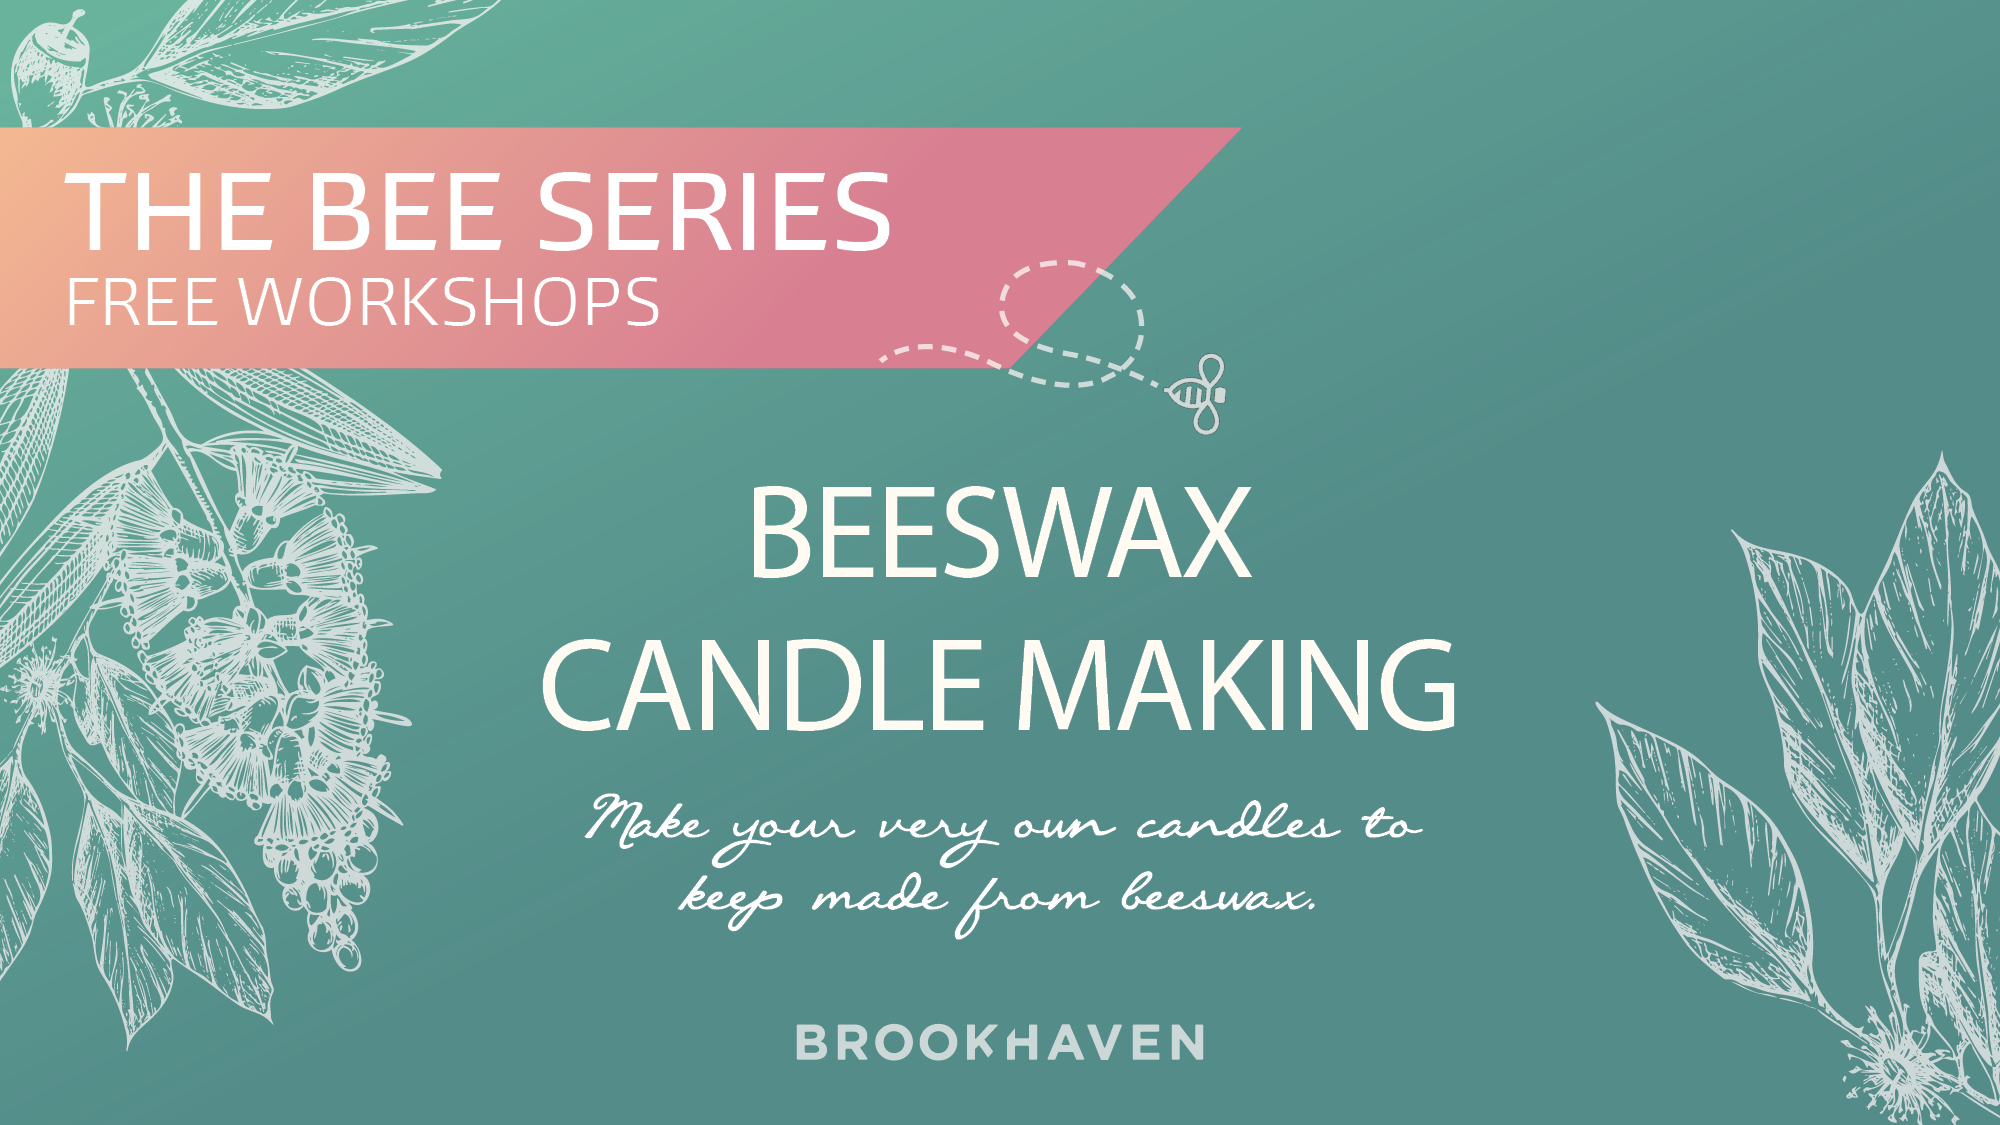 The Bee Series | Beeswax Candle Making